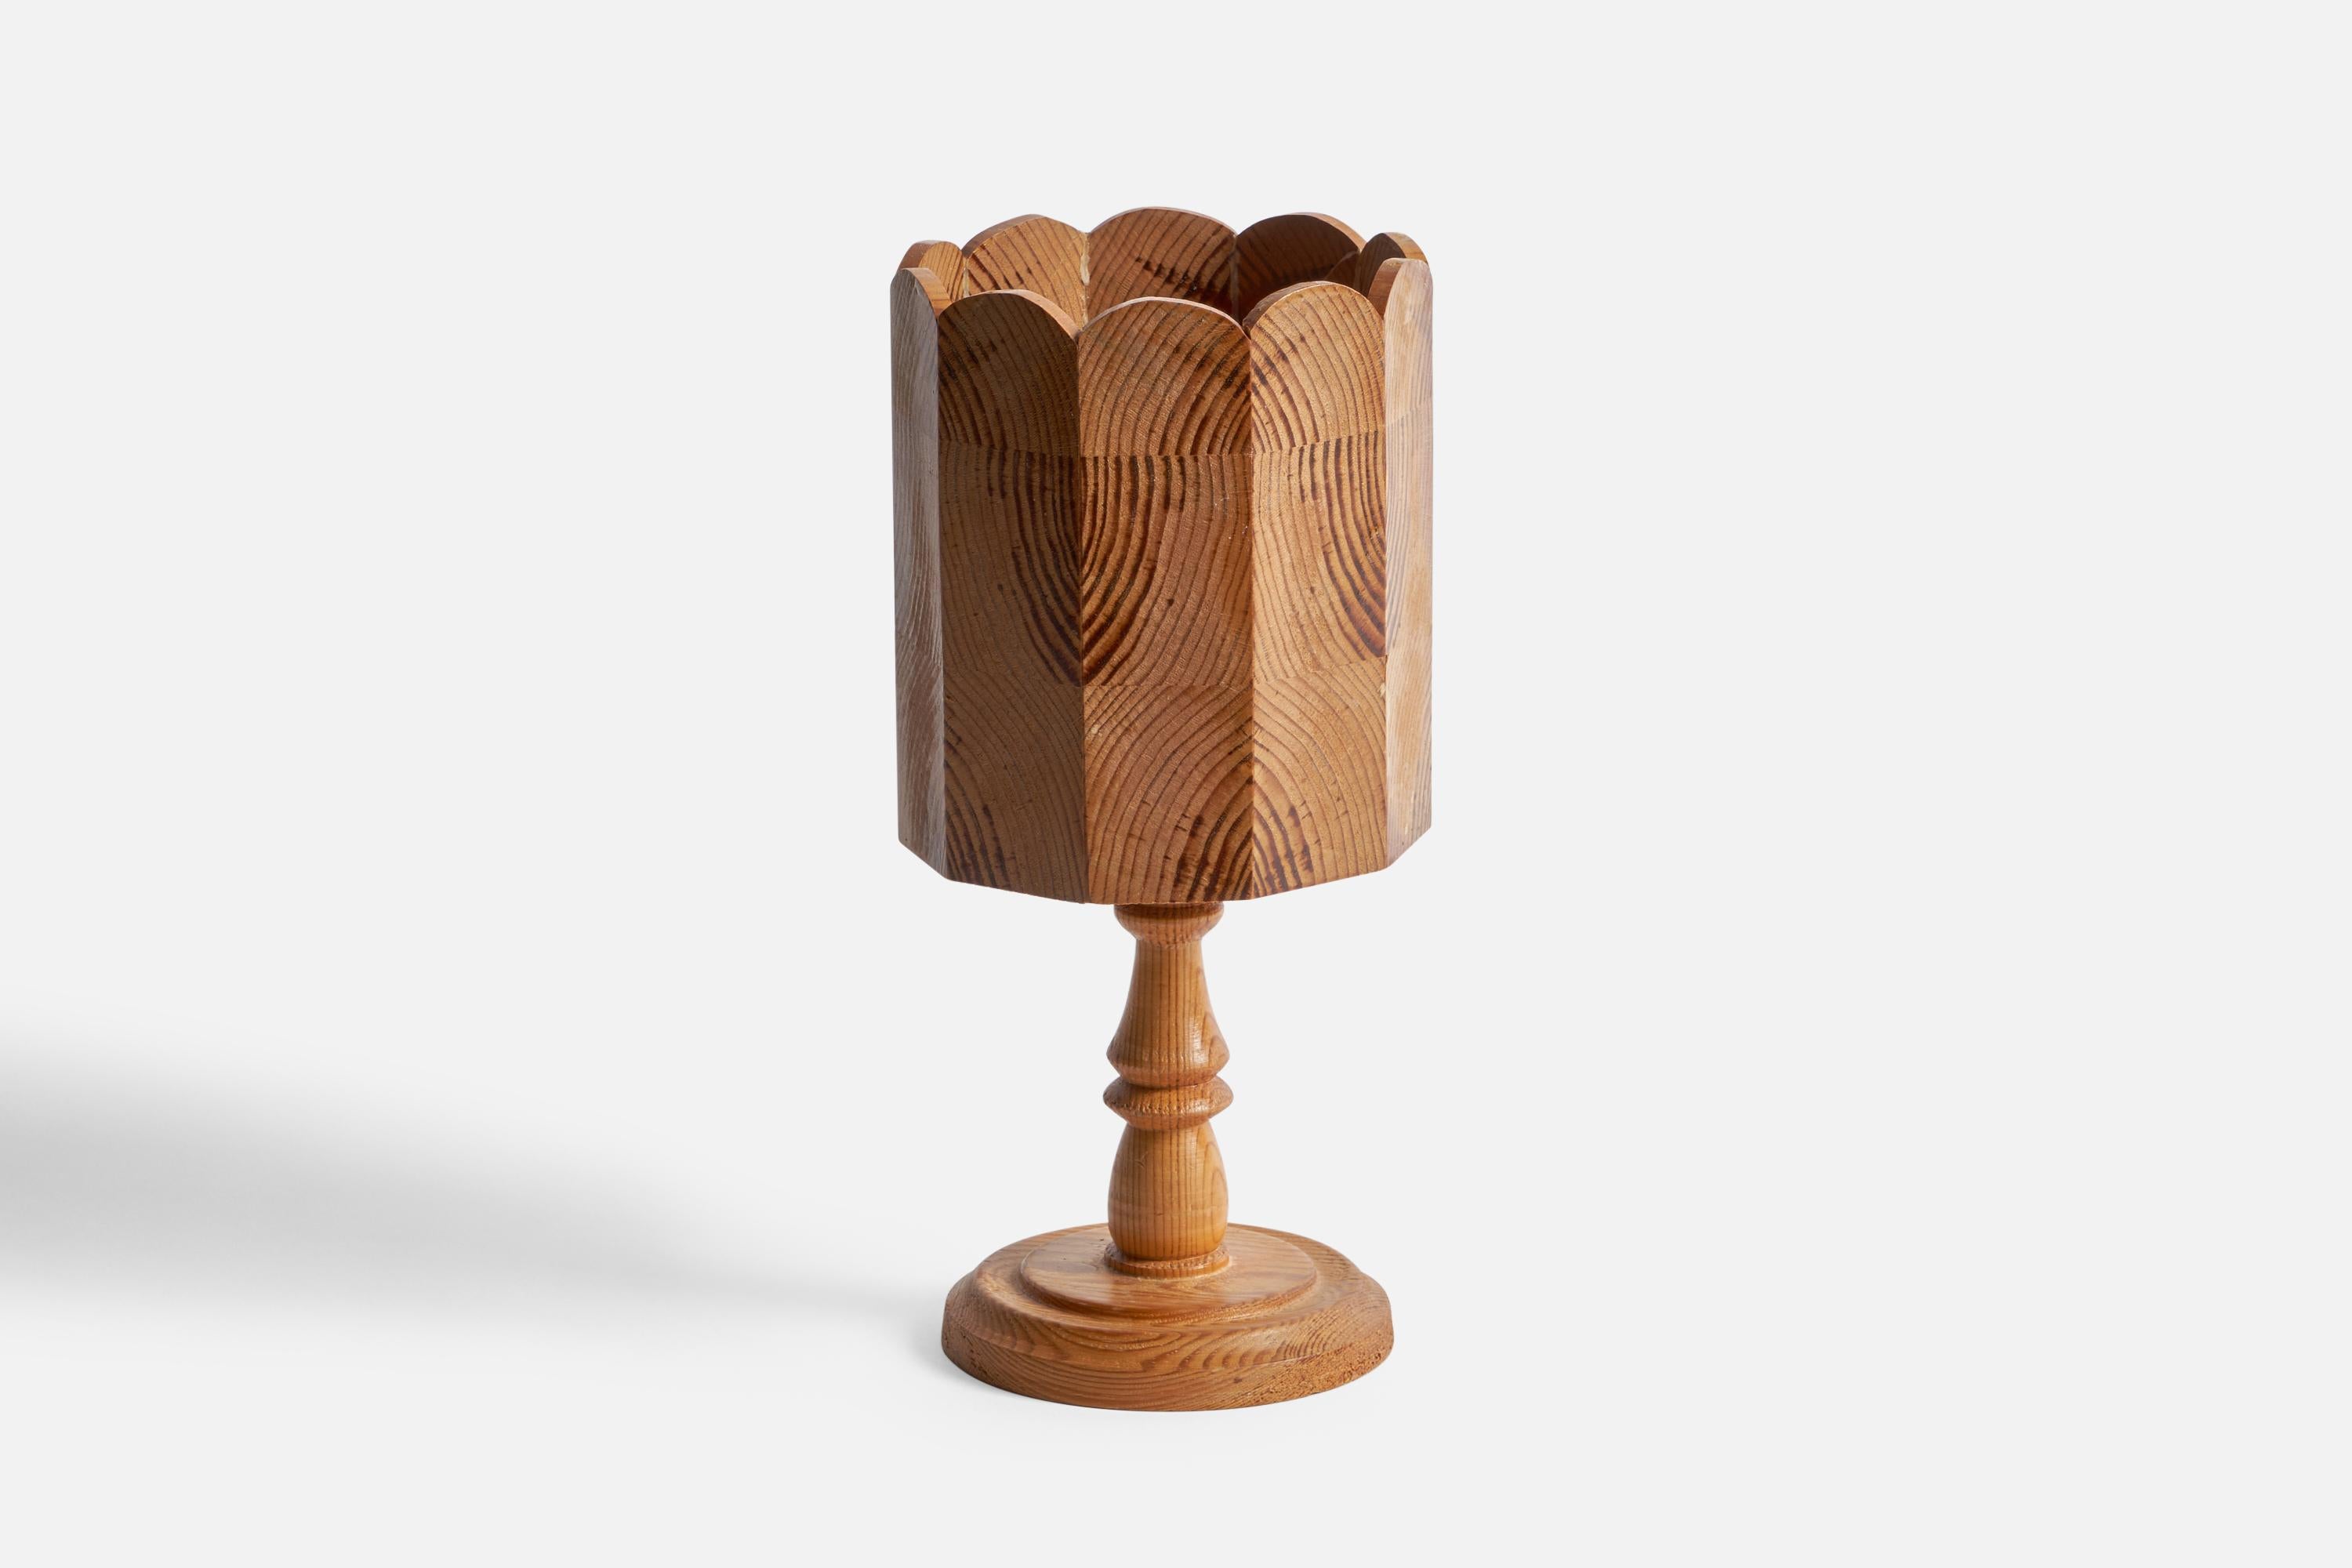 A pine table lamp designed and produced in Sweden, 1970s.

Overall Dimensions (inches): 11.8” H x 5.5” Diameter
Bulb Specifications: E-14 Bulb
Number of Sockets: 1
All lighting will be converted for US usage. We are unable to confirm that any